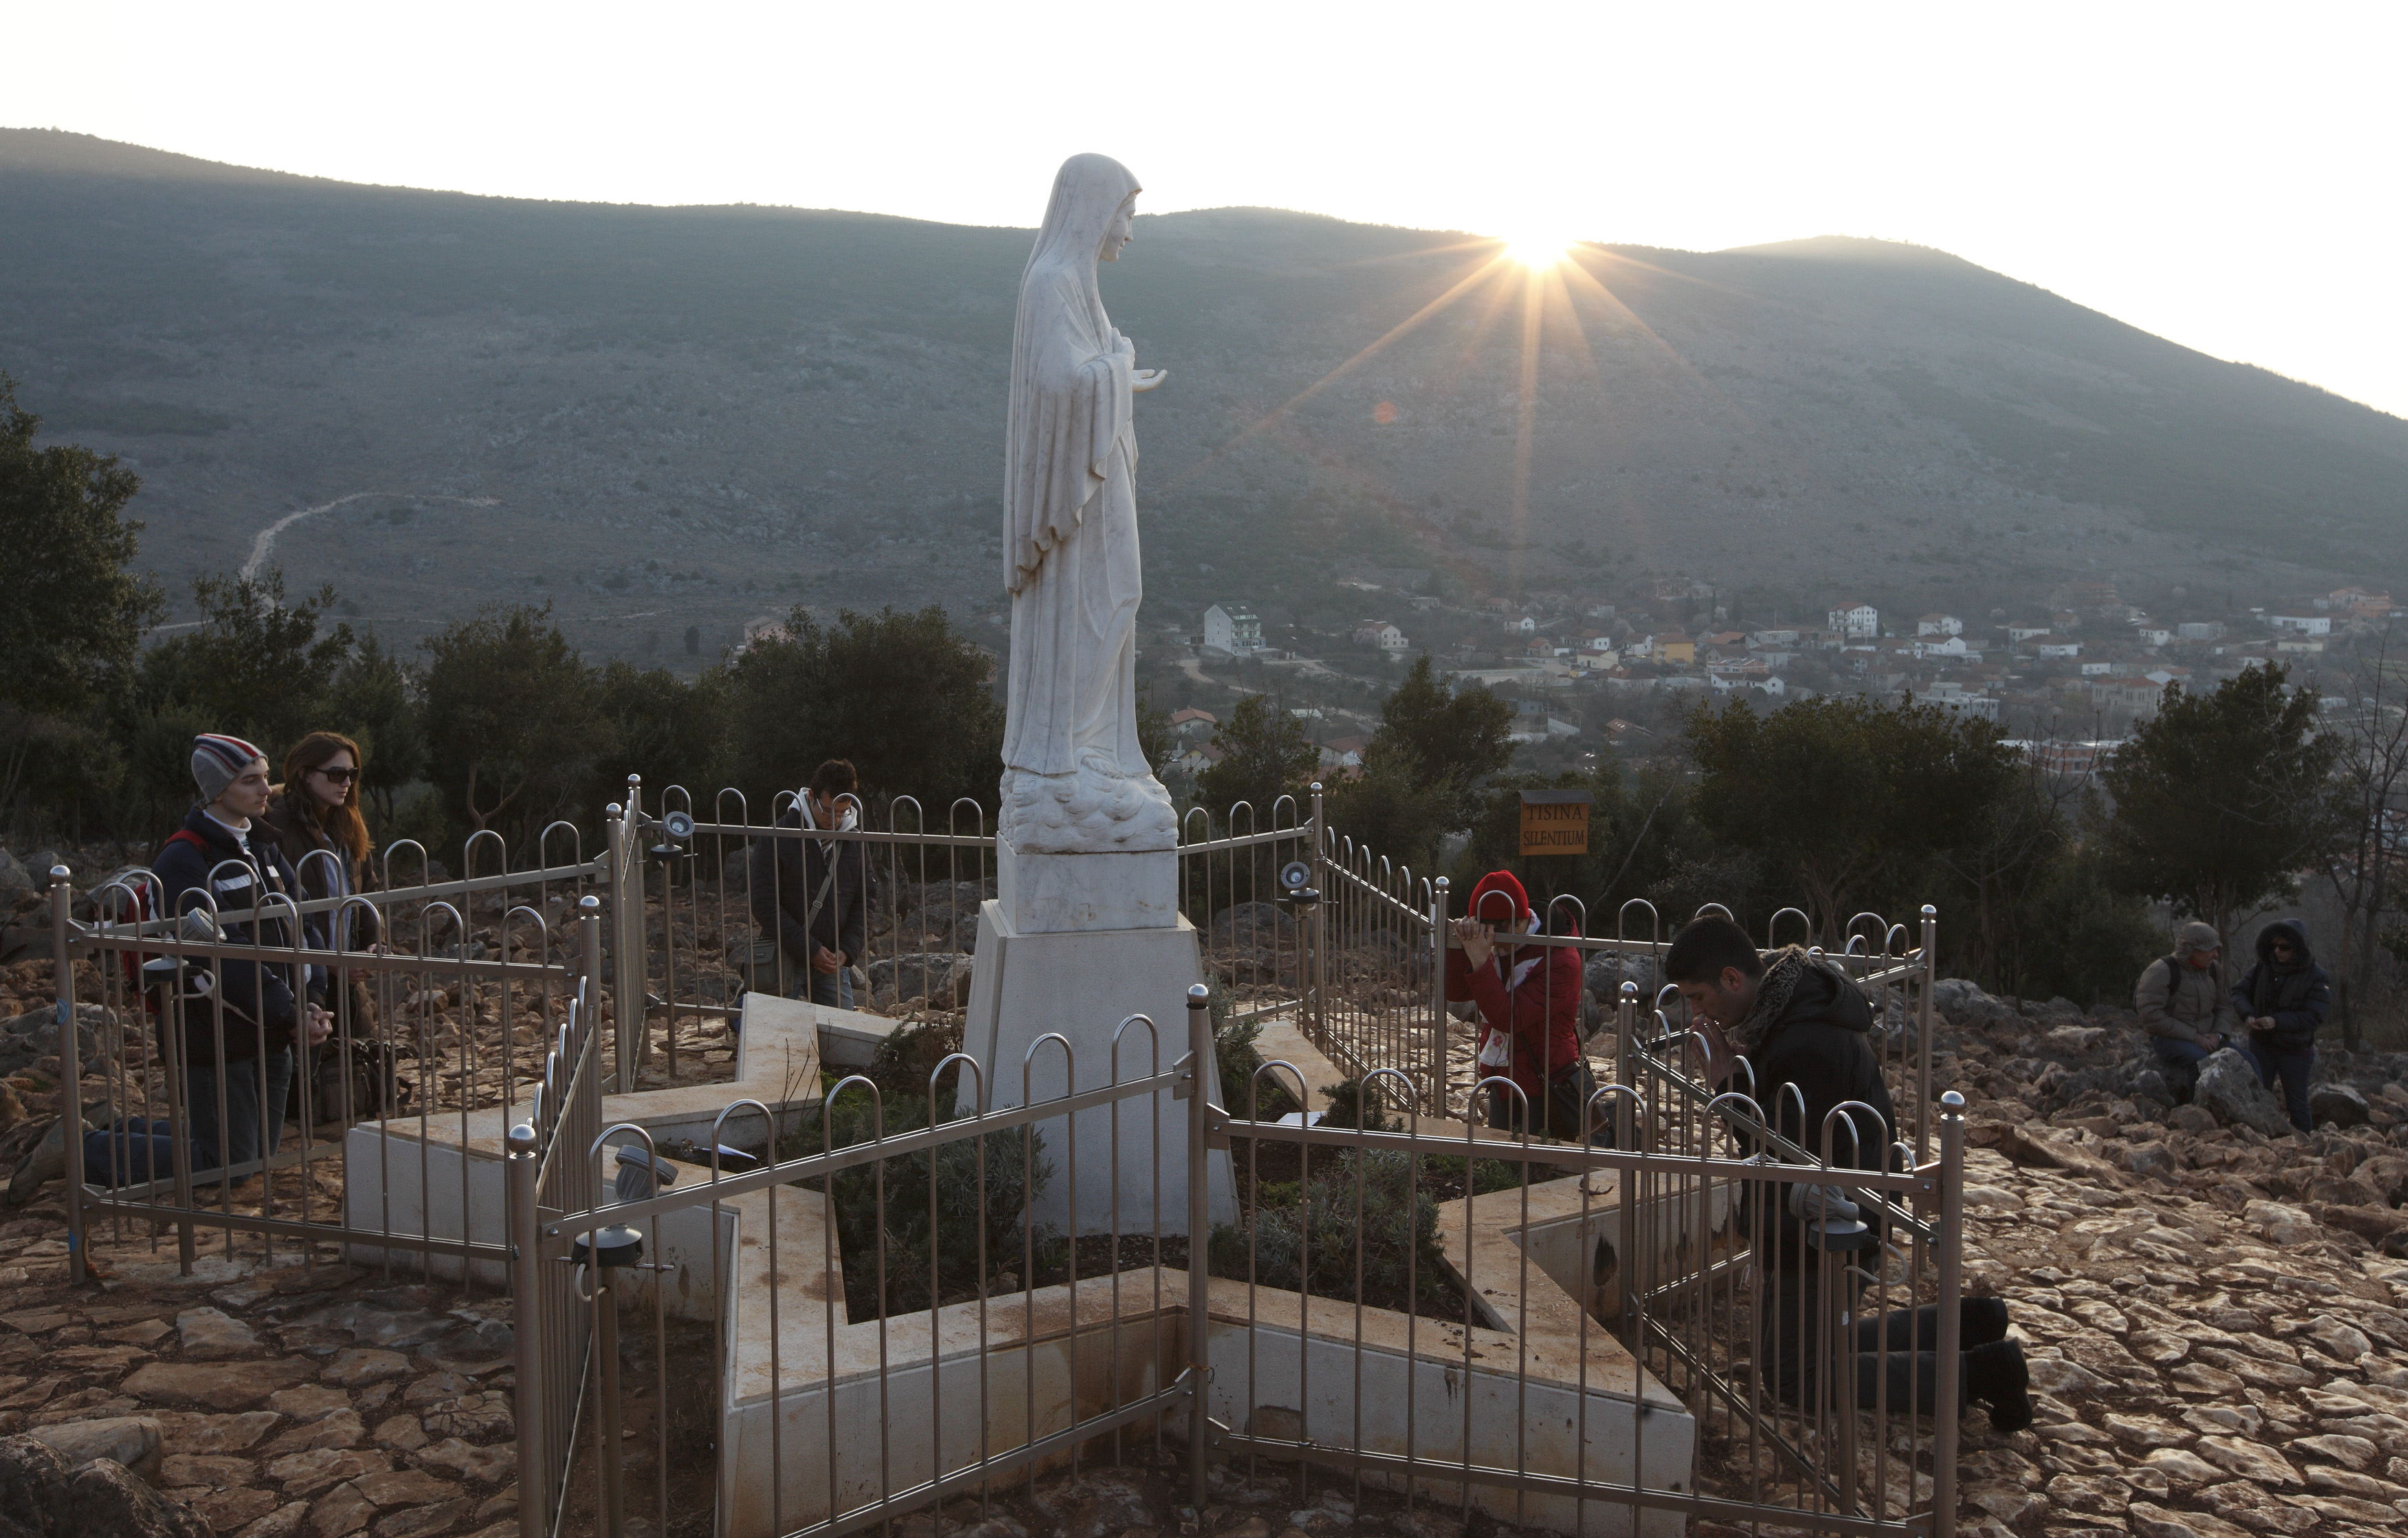 Vatican official: Church must be prudent judging Medjugorje apparitions